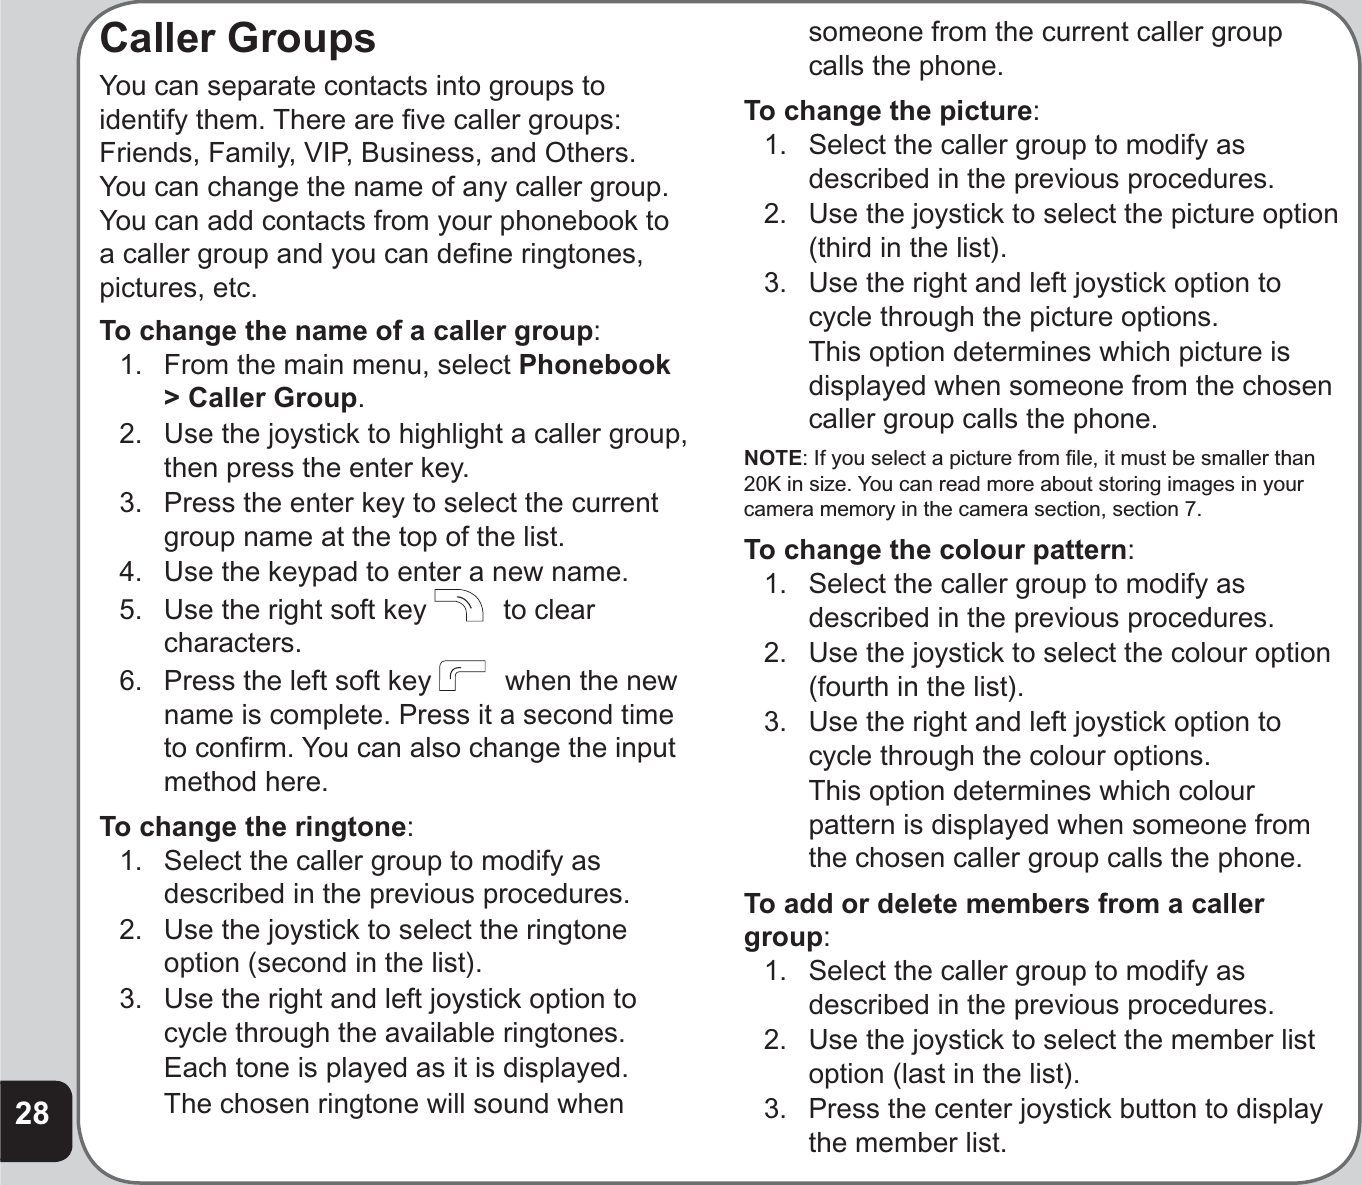 28Caller GroupsYou can separate contacts into groups to identify them. There are ﬁ ve caller groups: Friends, Family, VIP, Business, and Others. You can change the name of any caller group. You can add contacts from your phonebook to a caller group and you can deﬁ ne ringtones, pictures, etc.To change the name of a caller group:1.  From the main menu, select Phonebook&gt; Caller Group.2.  Use the joystick to highlight a caller group, then press the enter key.3.  Press the enter key to select the current group name at the top of the list.4.  Use the keypad to enter a new name.5.  Use the right soft key    to clear characters.6.  Press the left soft key    when the new name is complete. Press it a second time to conﬁ rm. You can also change the input method here.To change the ringtone:1.  Select the caller group to modify as described in the previous procedures.2.  Use the joystick to select the ringtone option (second in the list).3.  Use the right and left joystick option to cycle through the available ringtones.  Each tone is played as it is displayed.  The chosen ringtone will sound when someone from the current caller group calls the phone.To change the picture:1.  Select the caller group to modify as described in the previous procedures.2.  Use the joystick to select the picture option (third in the list).3.  Use the right and left joystick option to cycle through the picture options.  This option determines which picture is displayed when someone from the chosen caller group calls the phone.NOTE: If you select a picture from ﬁ le, it must be smaller than 20K in size. You can read more about storing images in your camera memory in the camera section, section 7.To change the colour pattern:1.  Select the caller group to modify as described in the previous procedures.2.  Use the joystick to select the colour option (fourth in the list).3.  Use the right and left joystick option to cycle through the colour options.  This option determines which colour pattern is displayed when someone from the chosen caller group calls the phone.To add or delete members from a caller group:1.  Select the caller group to modify as described in the previous procedures.2.  Use the joystick to select the member list option (last in the list).3.  Press the center joystick button to display the member list.